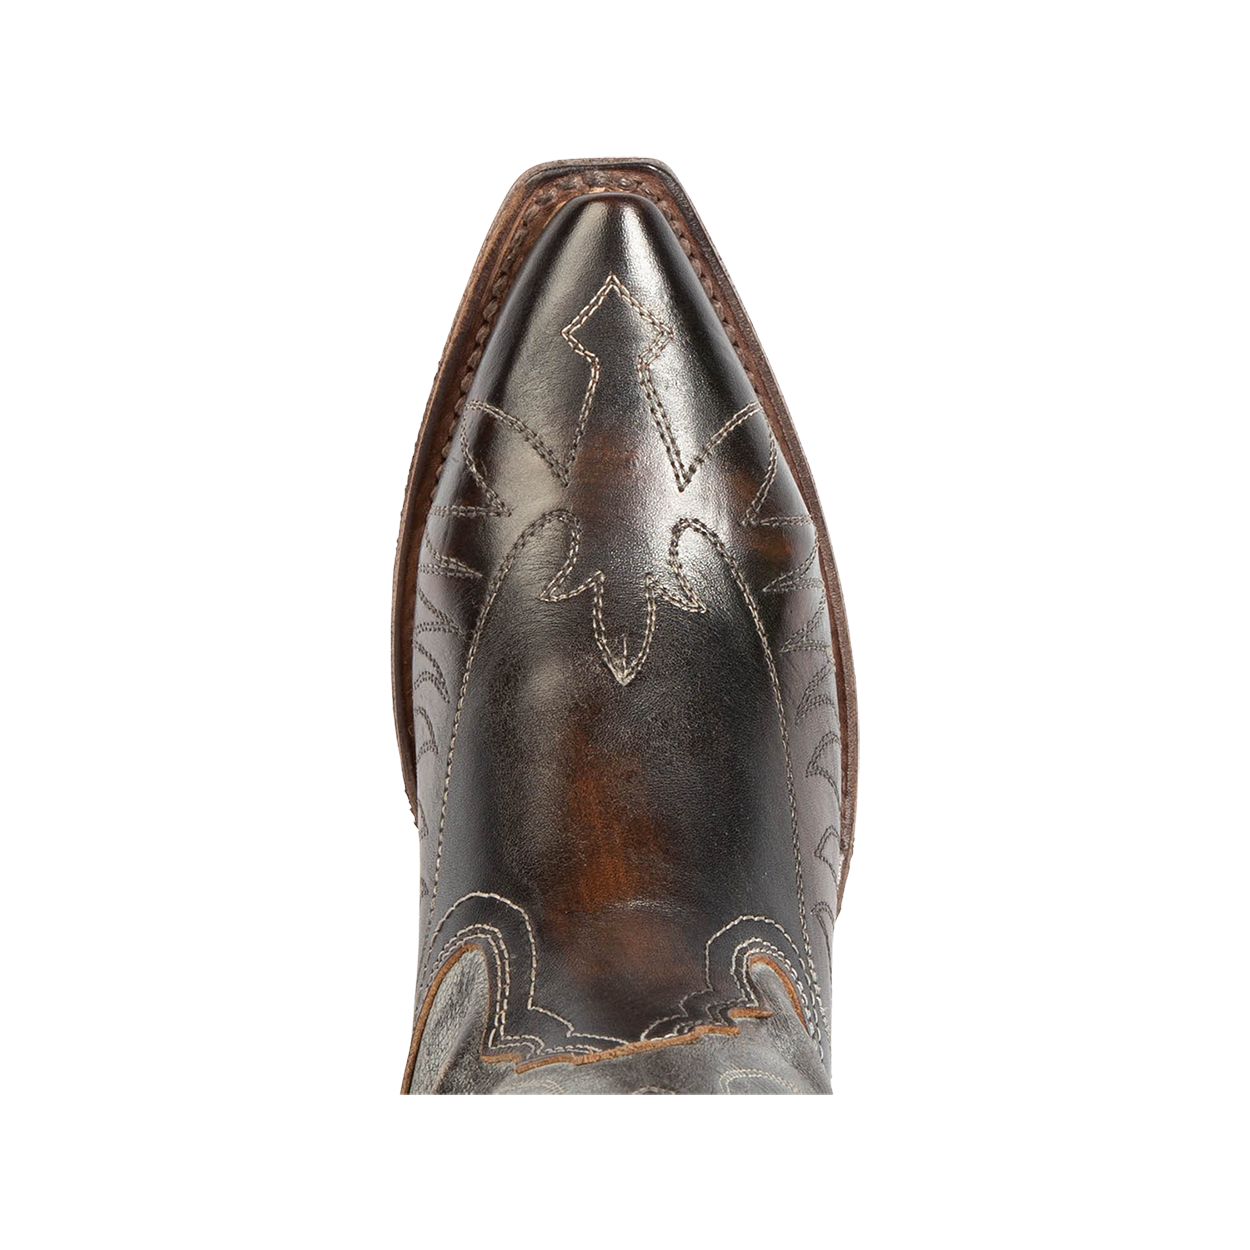 Top view showing snip toe construction with stitch detailing on FREEBIRD women's Misty ice multi leather tall western boot